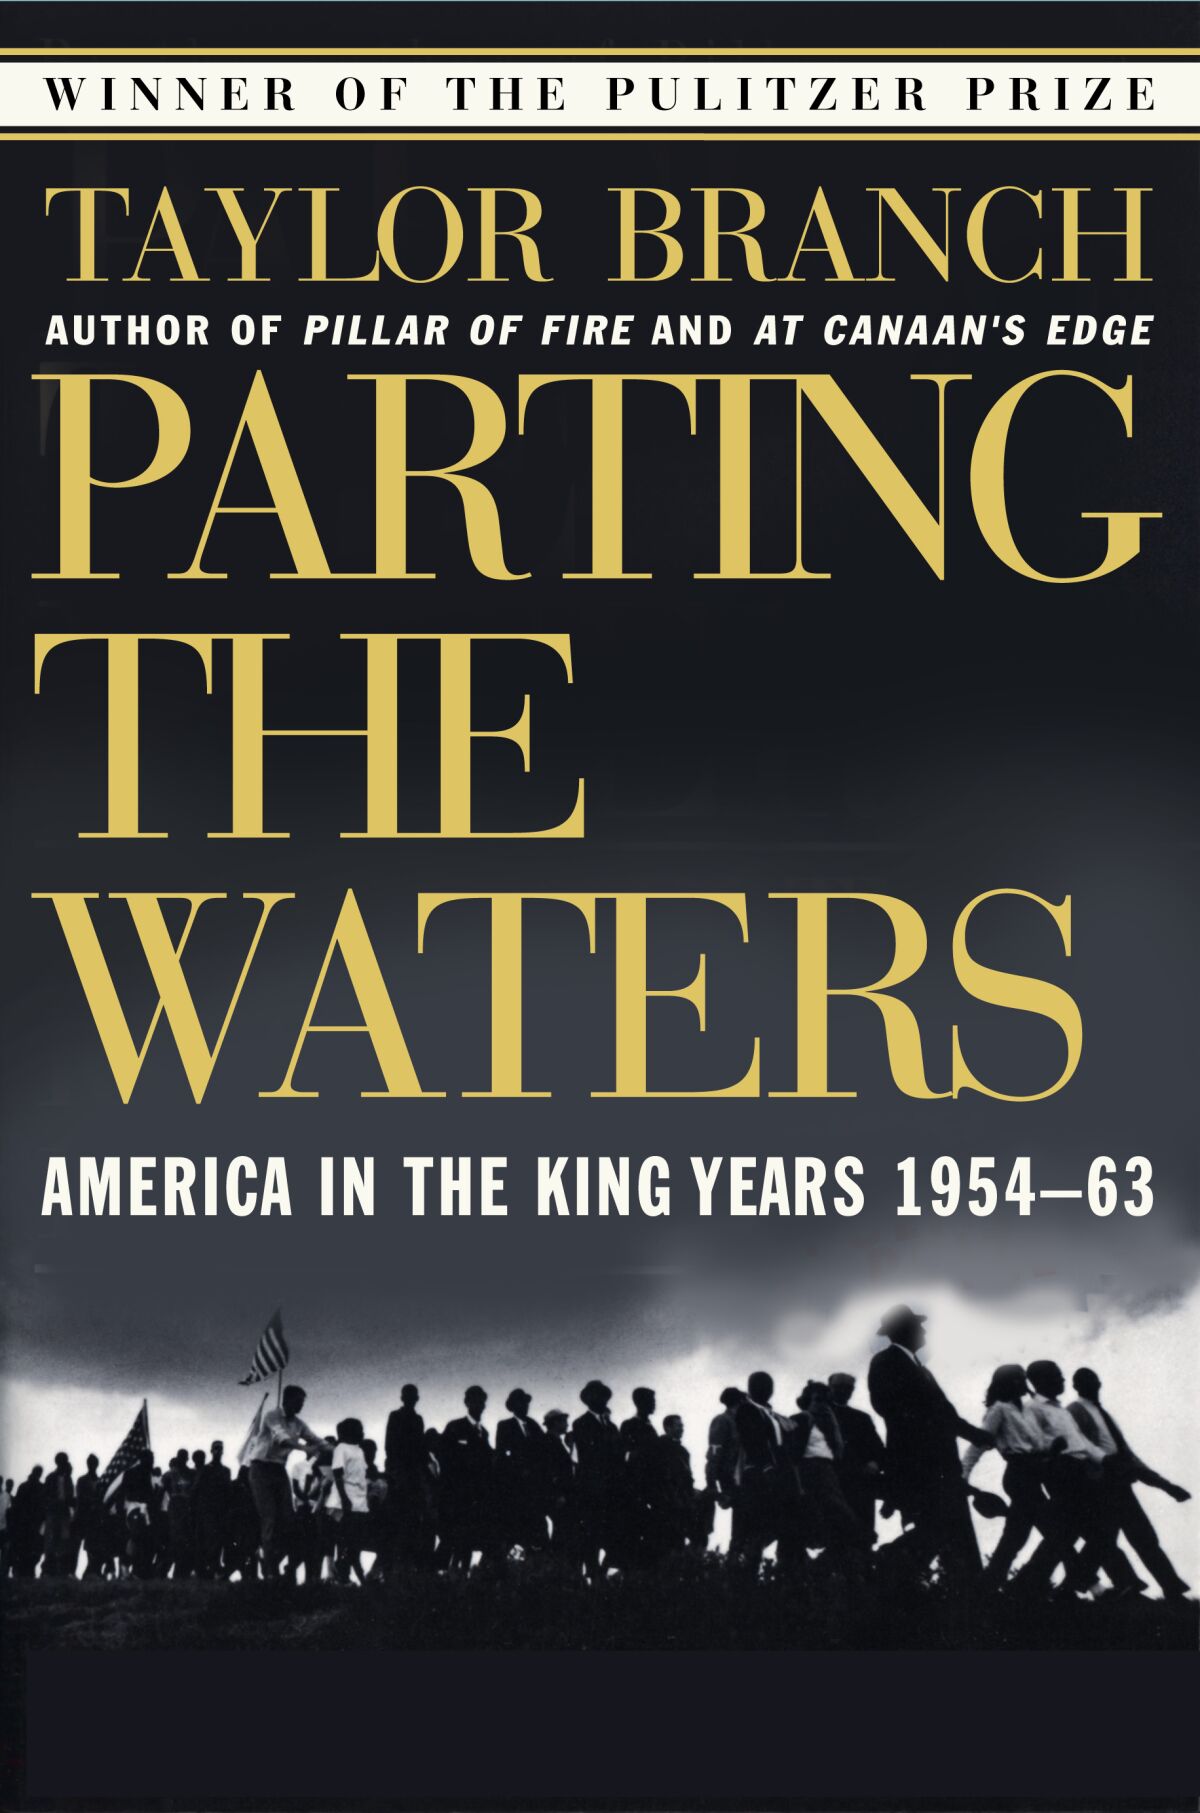 A book jacket for "Parting the Waters," by Taylor Branch. 